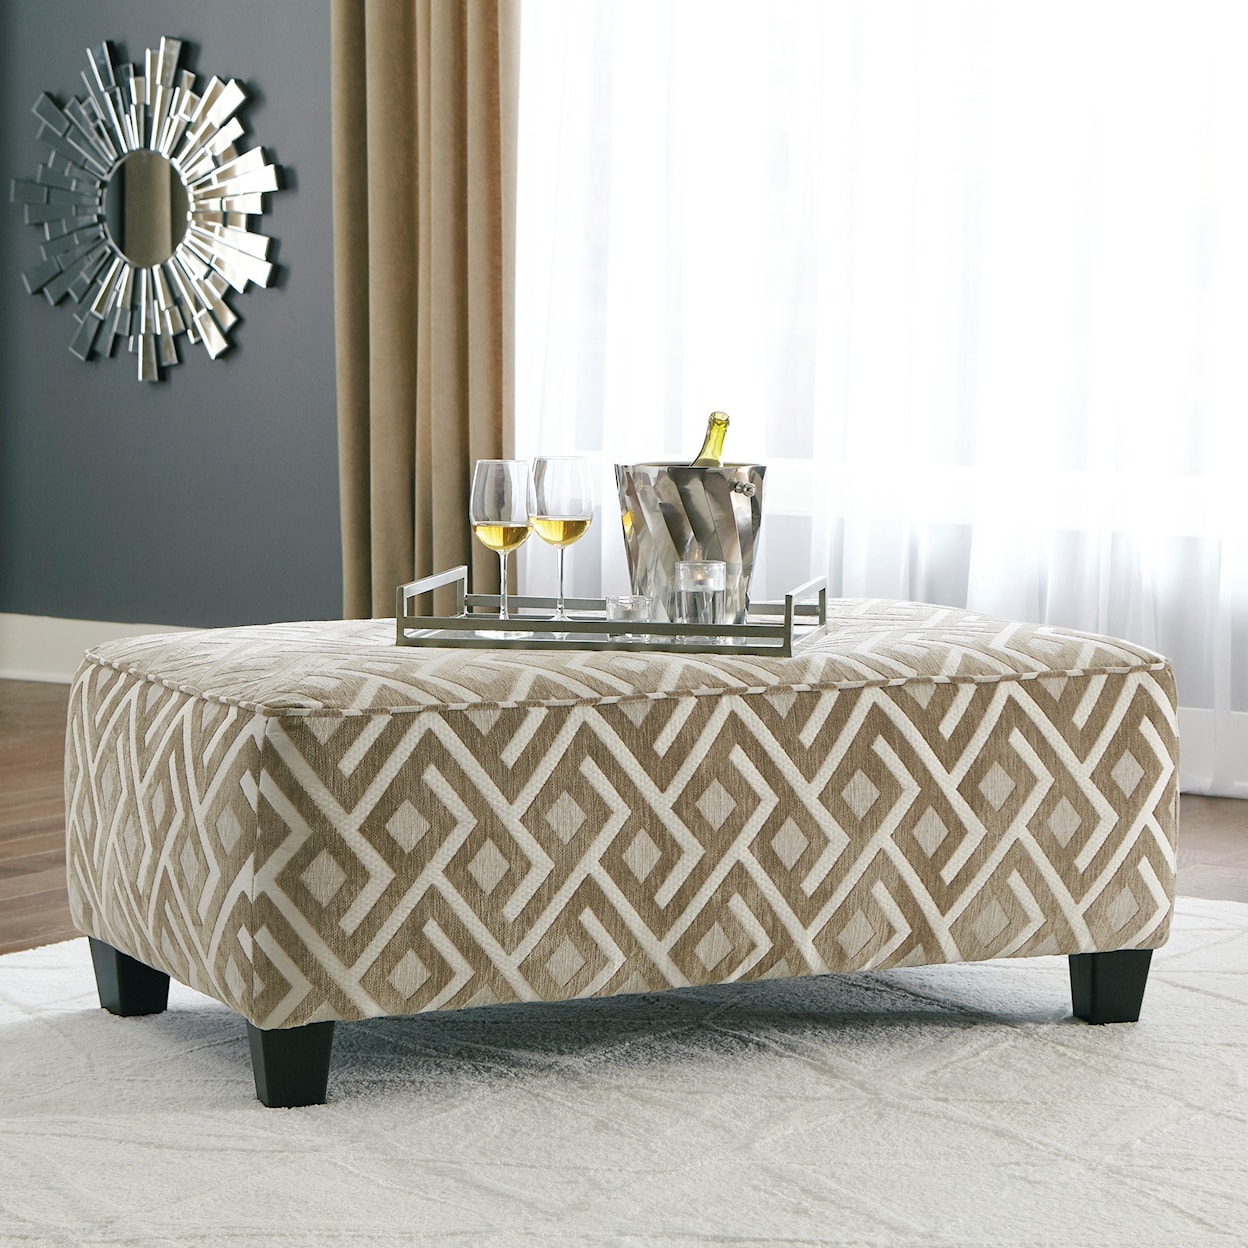 Signature Design by Ashley Furniture Dovemont Oversized Accent Ottoman